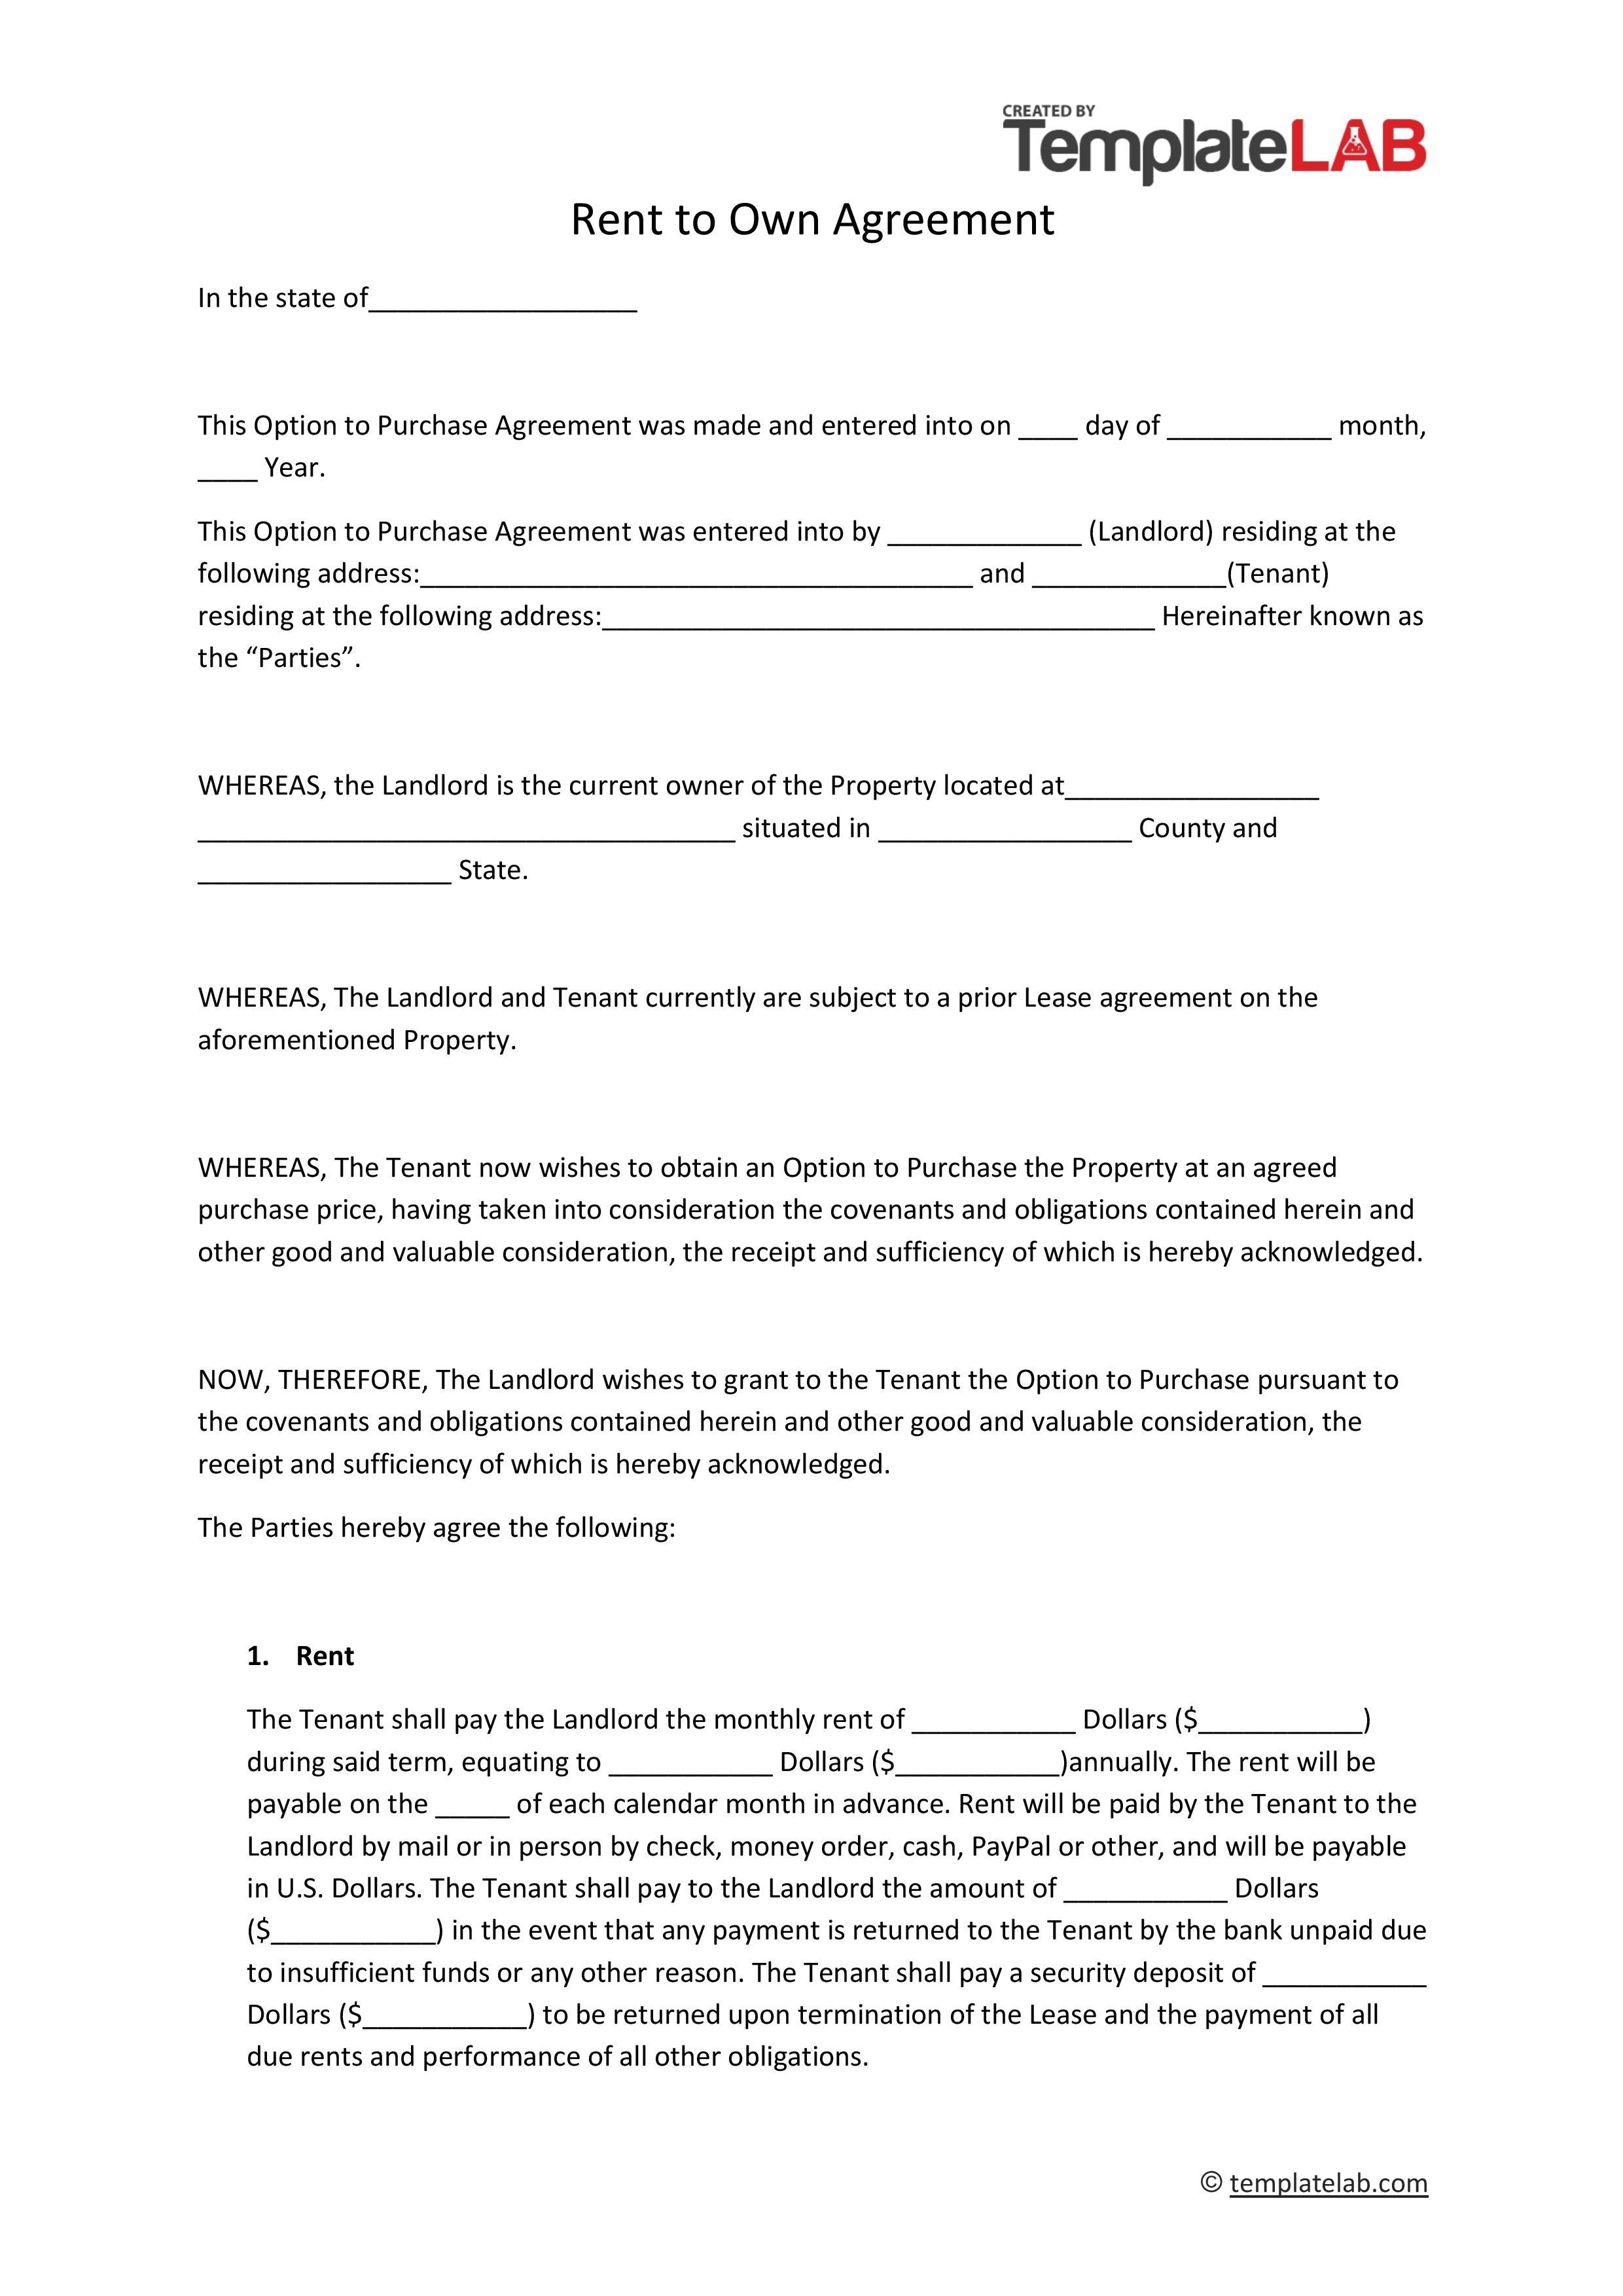 30 Free Rent To Own Contracts Templates TemplateLab